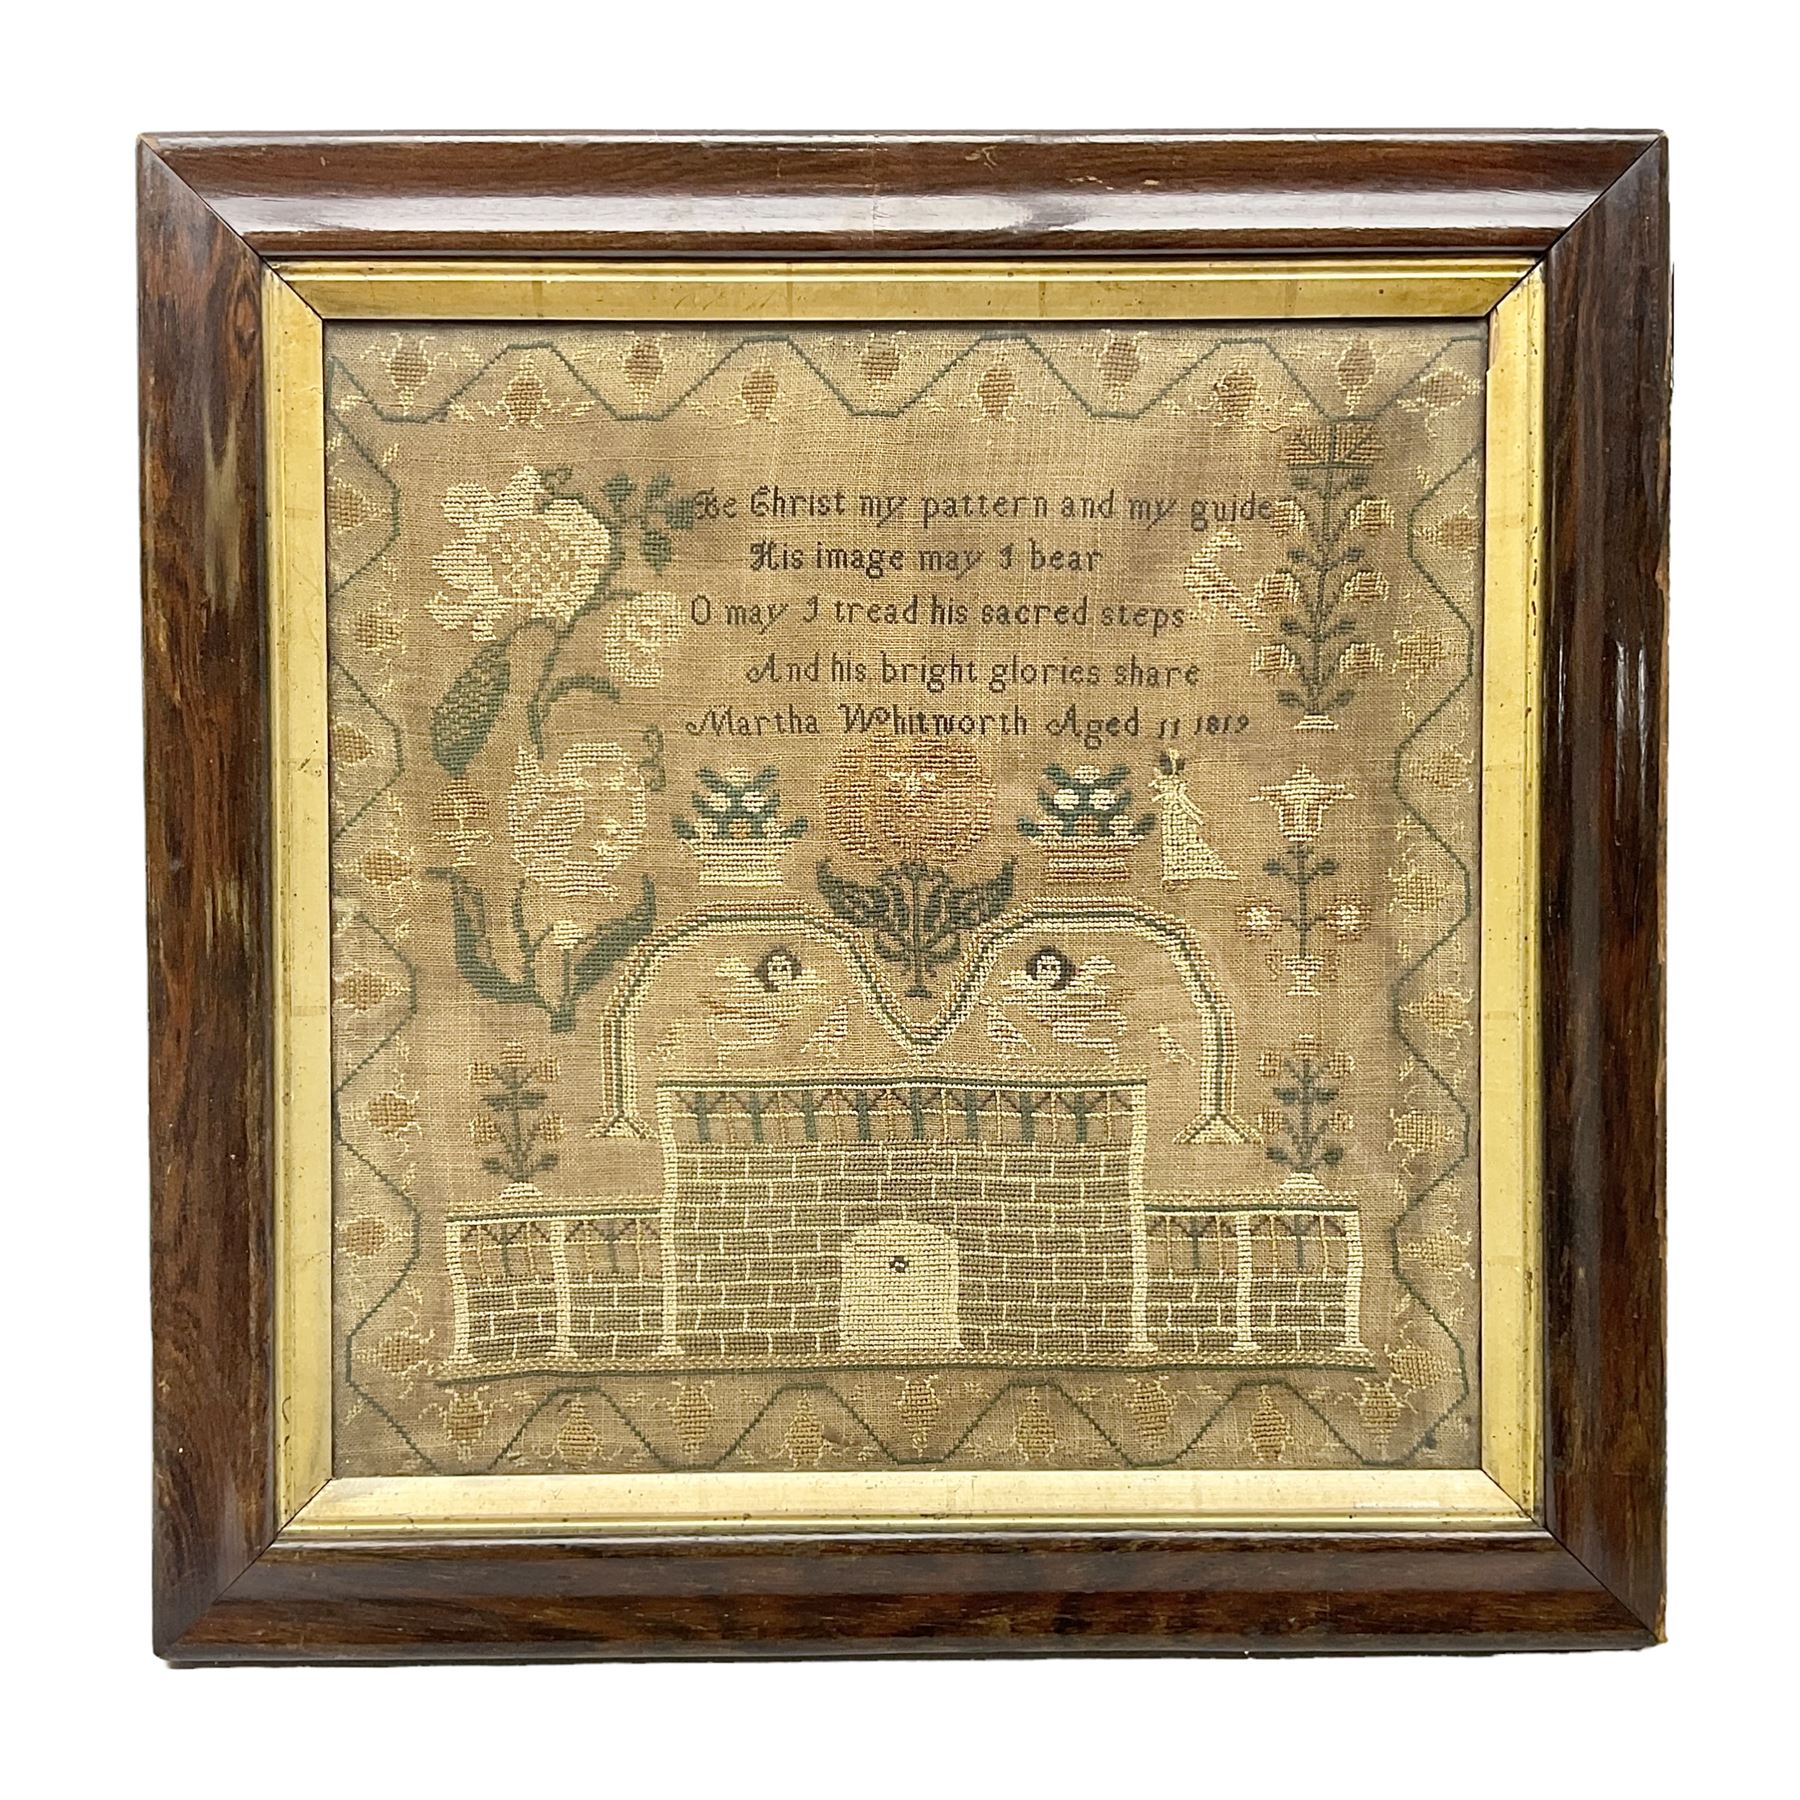 Victorian needlework sampler showing a mansion with cherubs and flowers